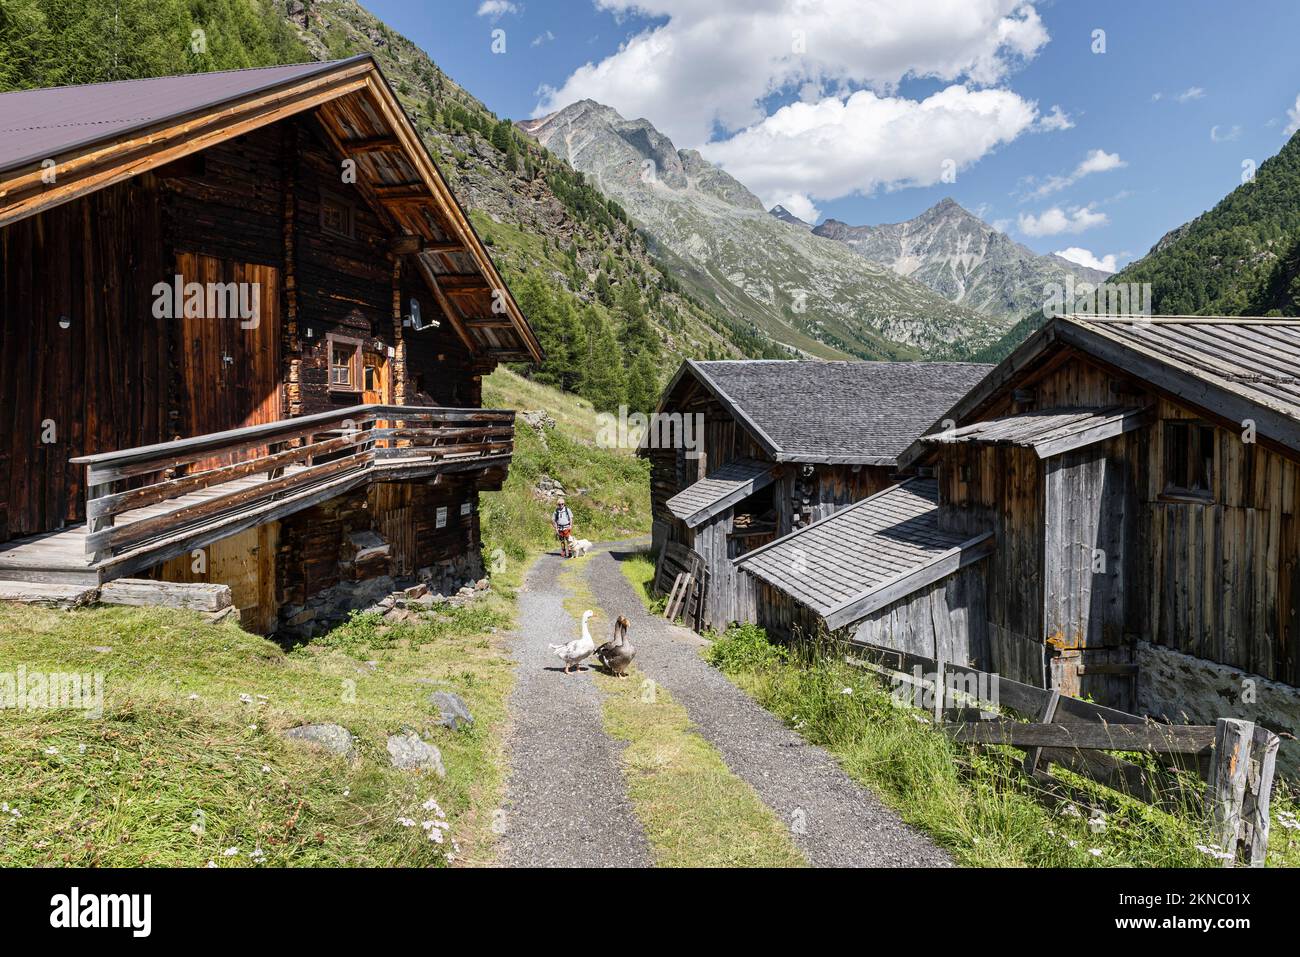 Hiker with geese in front of rustic alpine huts, mountain forests and peaks in the Windach valley, Ötztal Alps, Austria Stock Photo